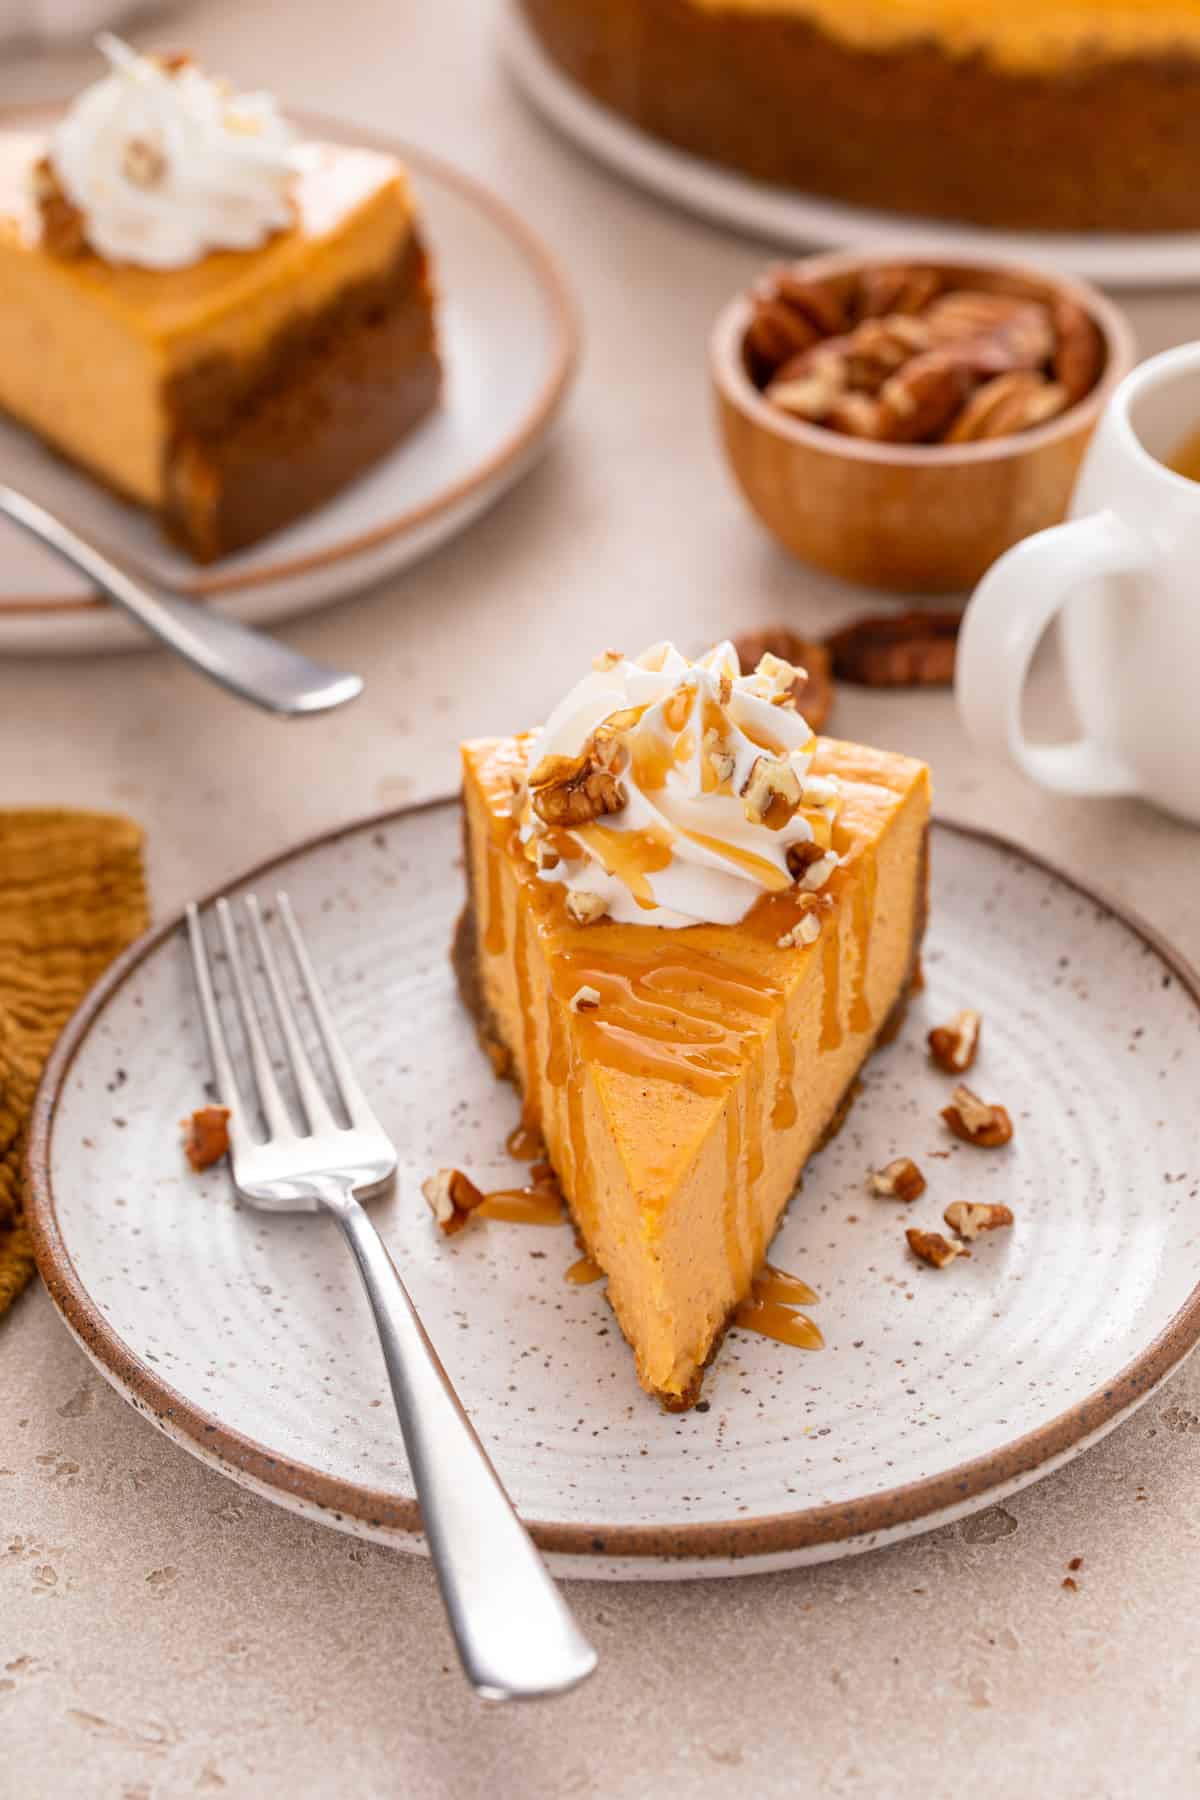 Slice of sweet potato cheesecake topped with salted caramel sauce, whipped cream, and chopped pecans.